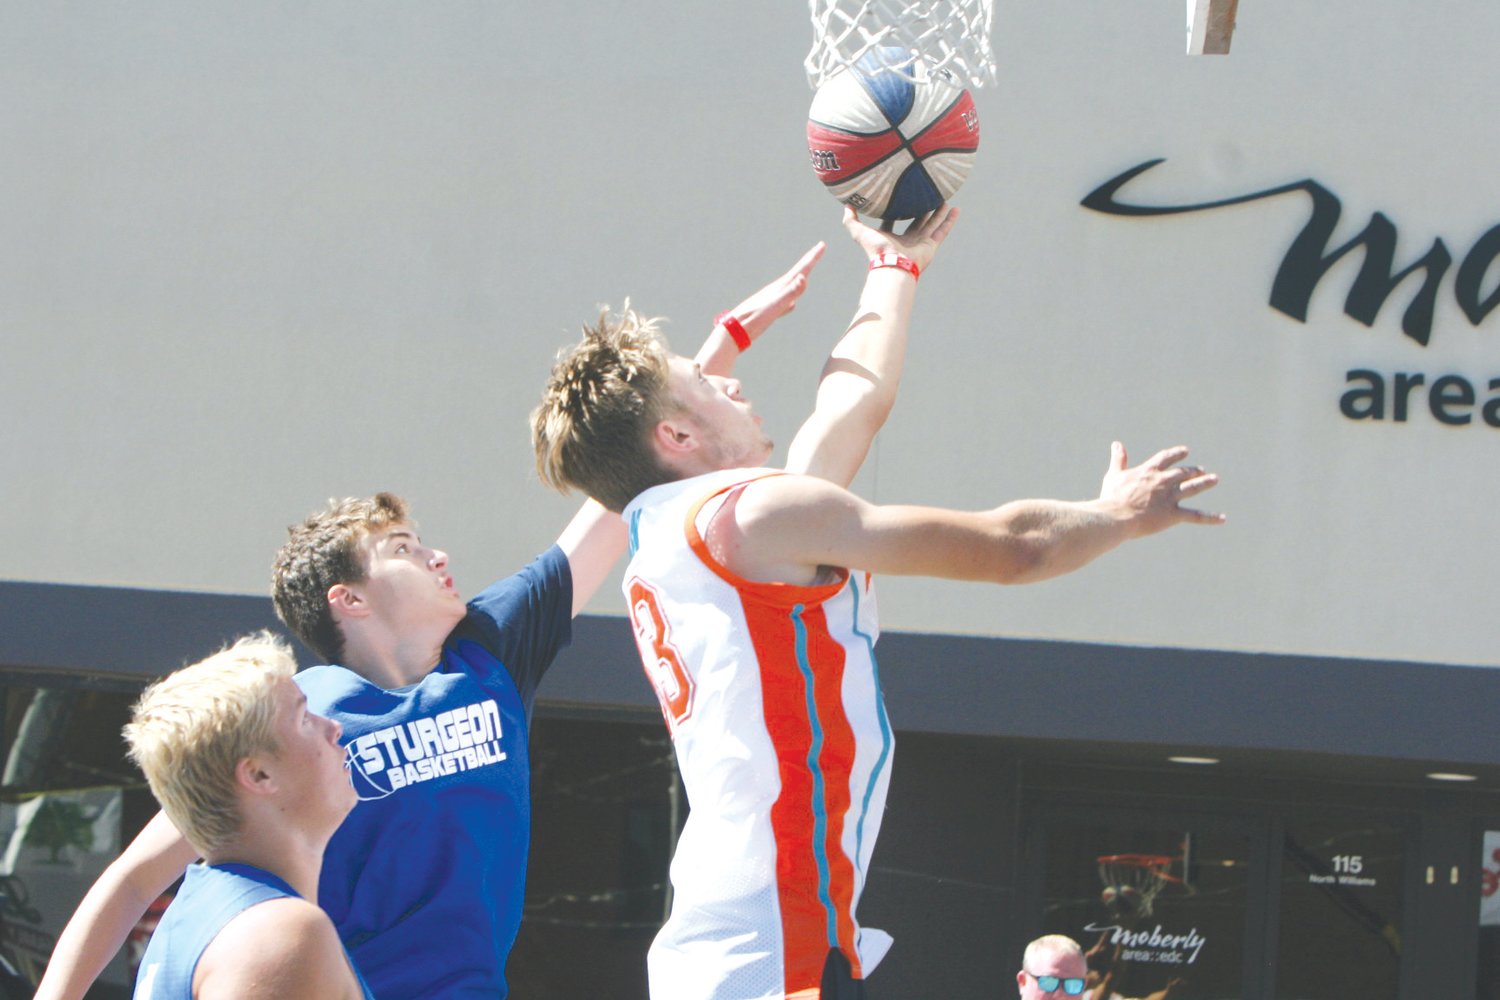 Carter Briscoe of Clark County goes for a layup during the Gus Macker 3-on-3 Basketball Tournament Saturday, Sept. 25, in Moberly. Theo Tate photo.